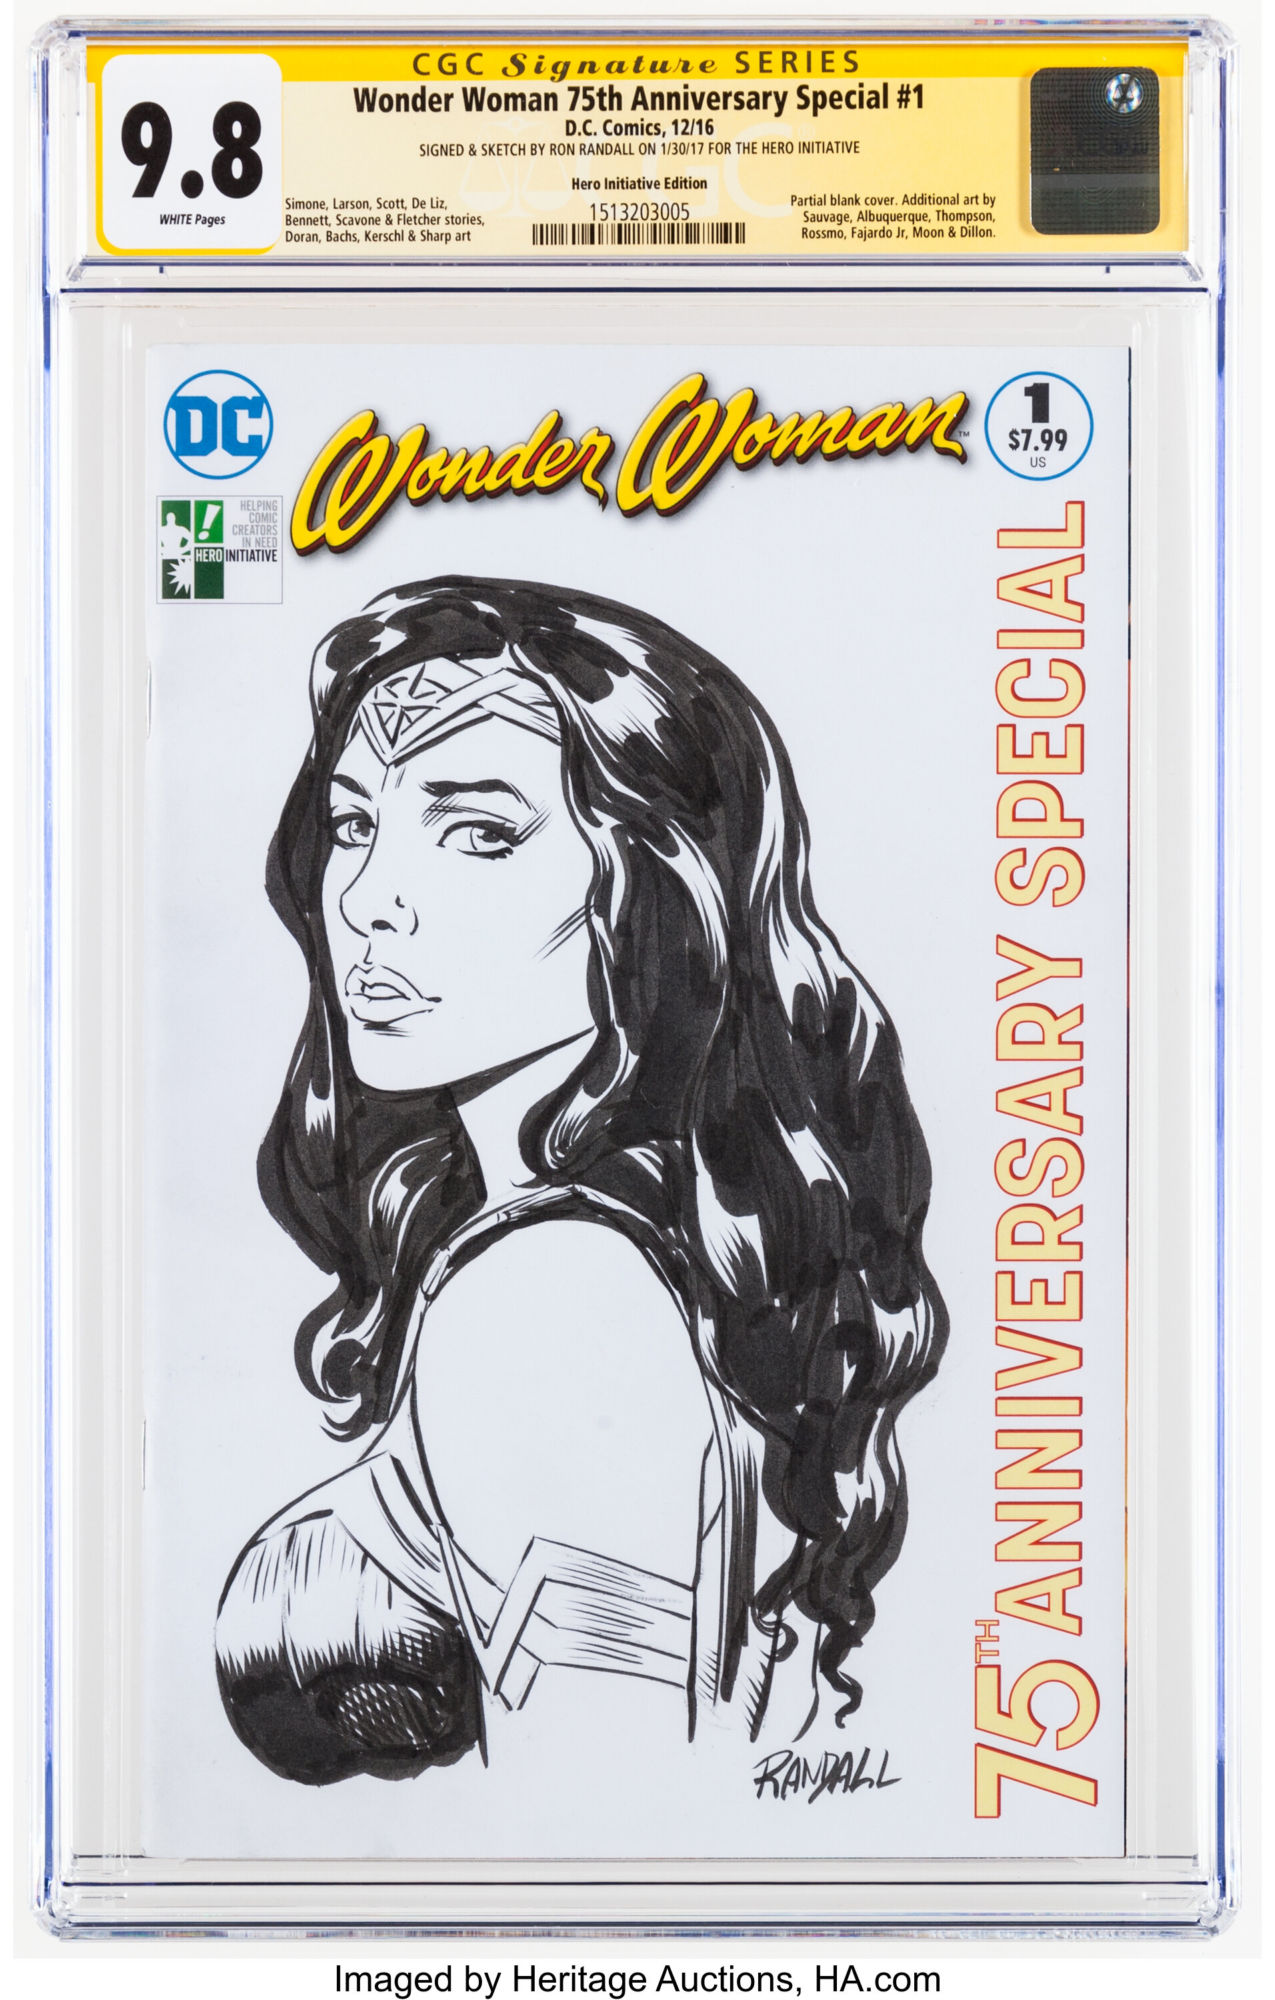 Trekkers Ron Randall Illustrates A OneOfAKind Wonder Woman Cover